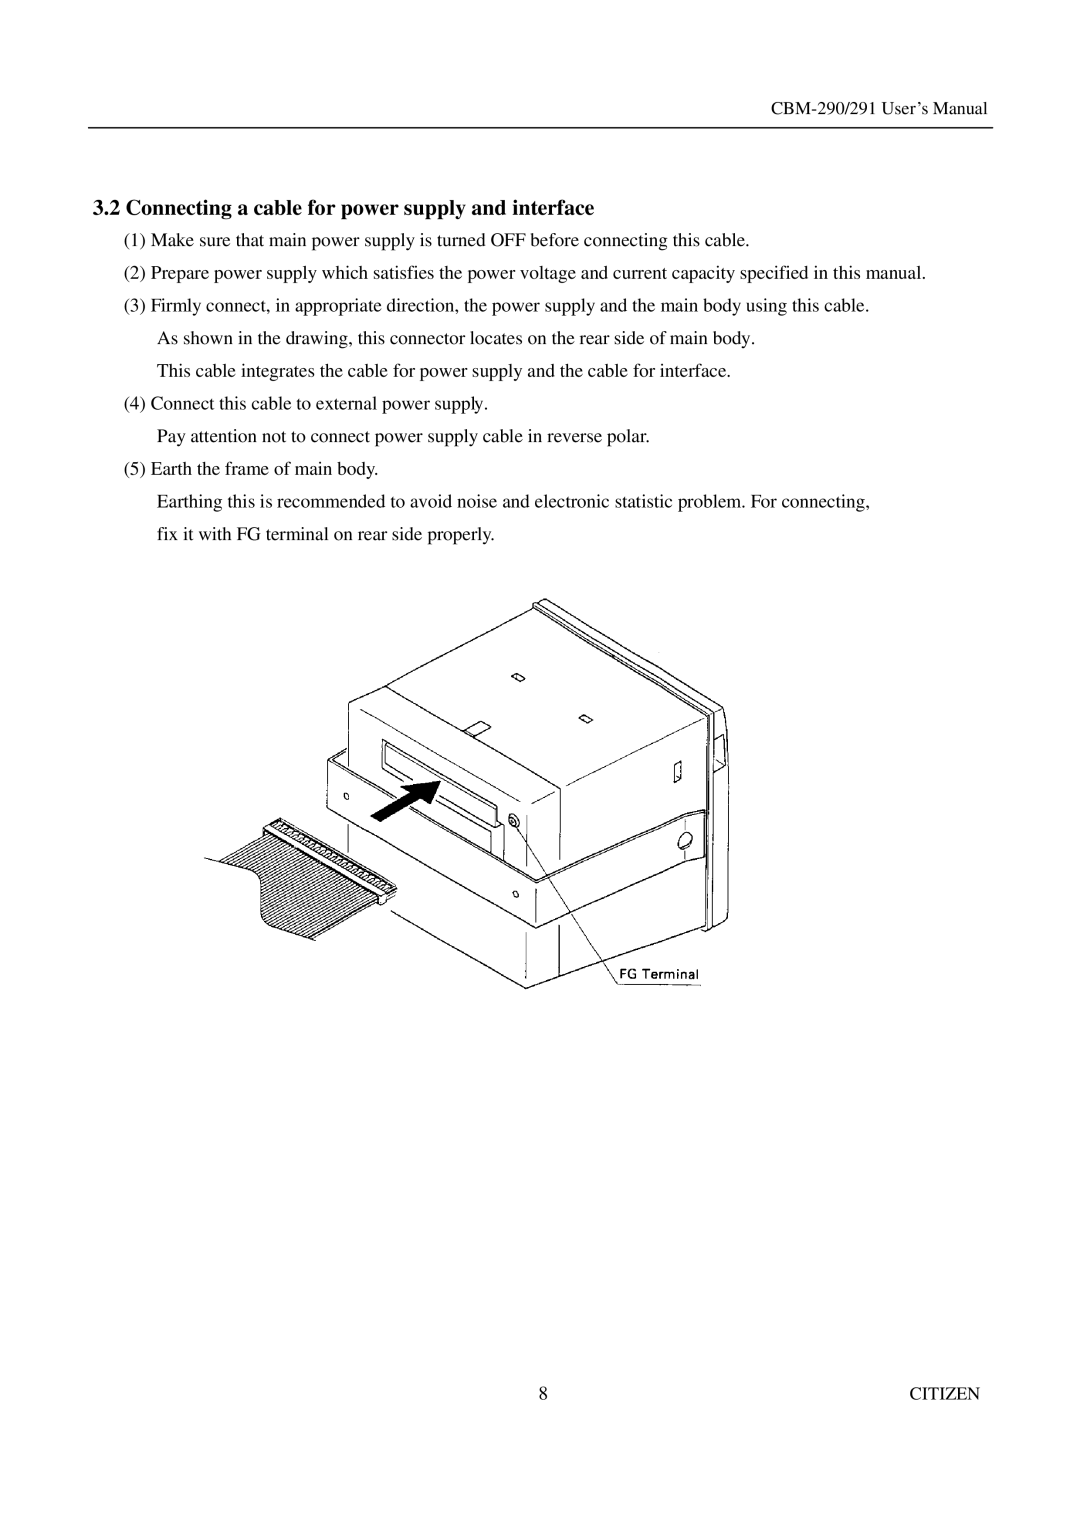 Citizen Systems CBM-290, 291 user manual Connecting a cable for power supply and interface 